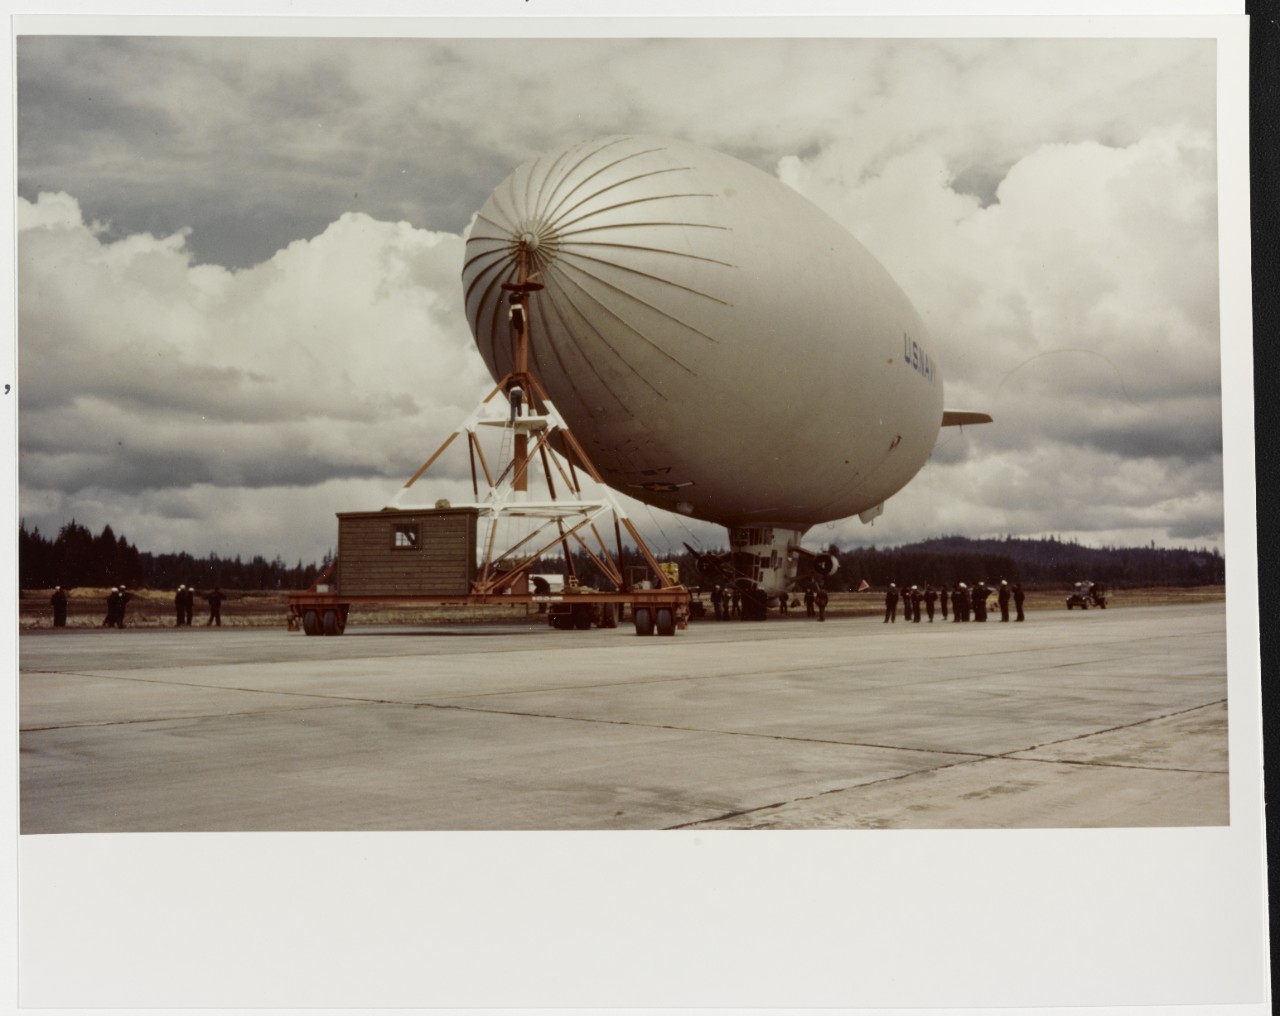 U.S. Navy Blimp K-87 attached to a mobile mooring mast, circa 1944-1945